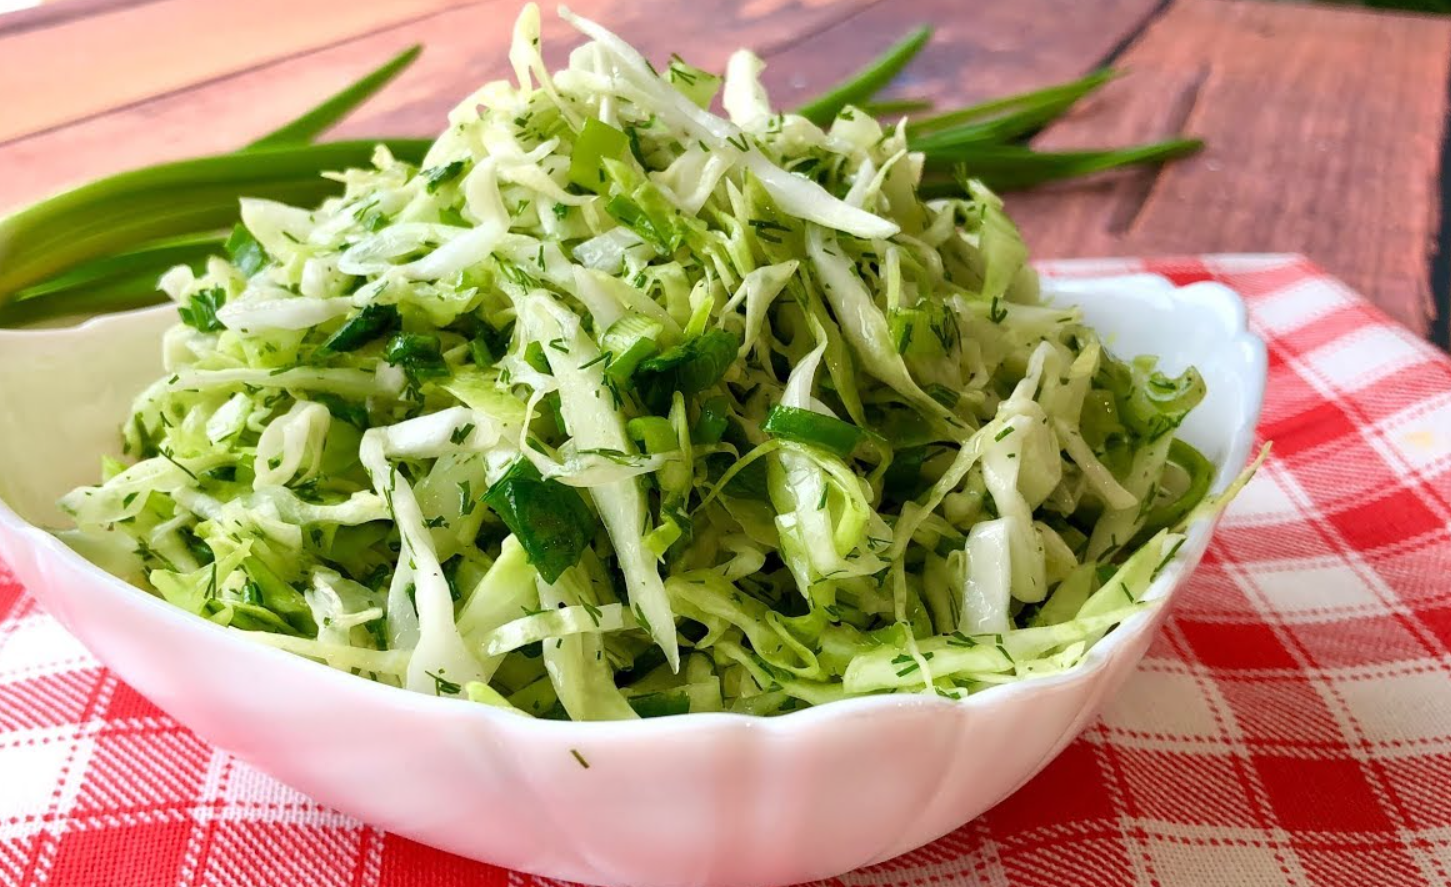 Cabbage and cucumber salad